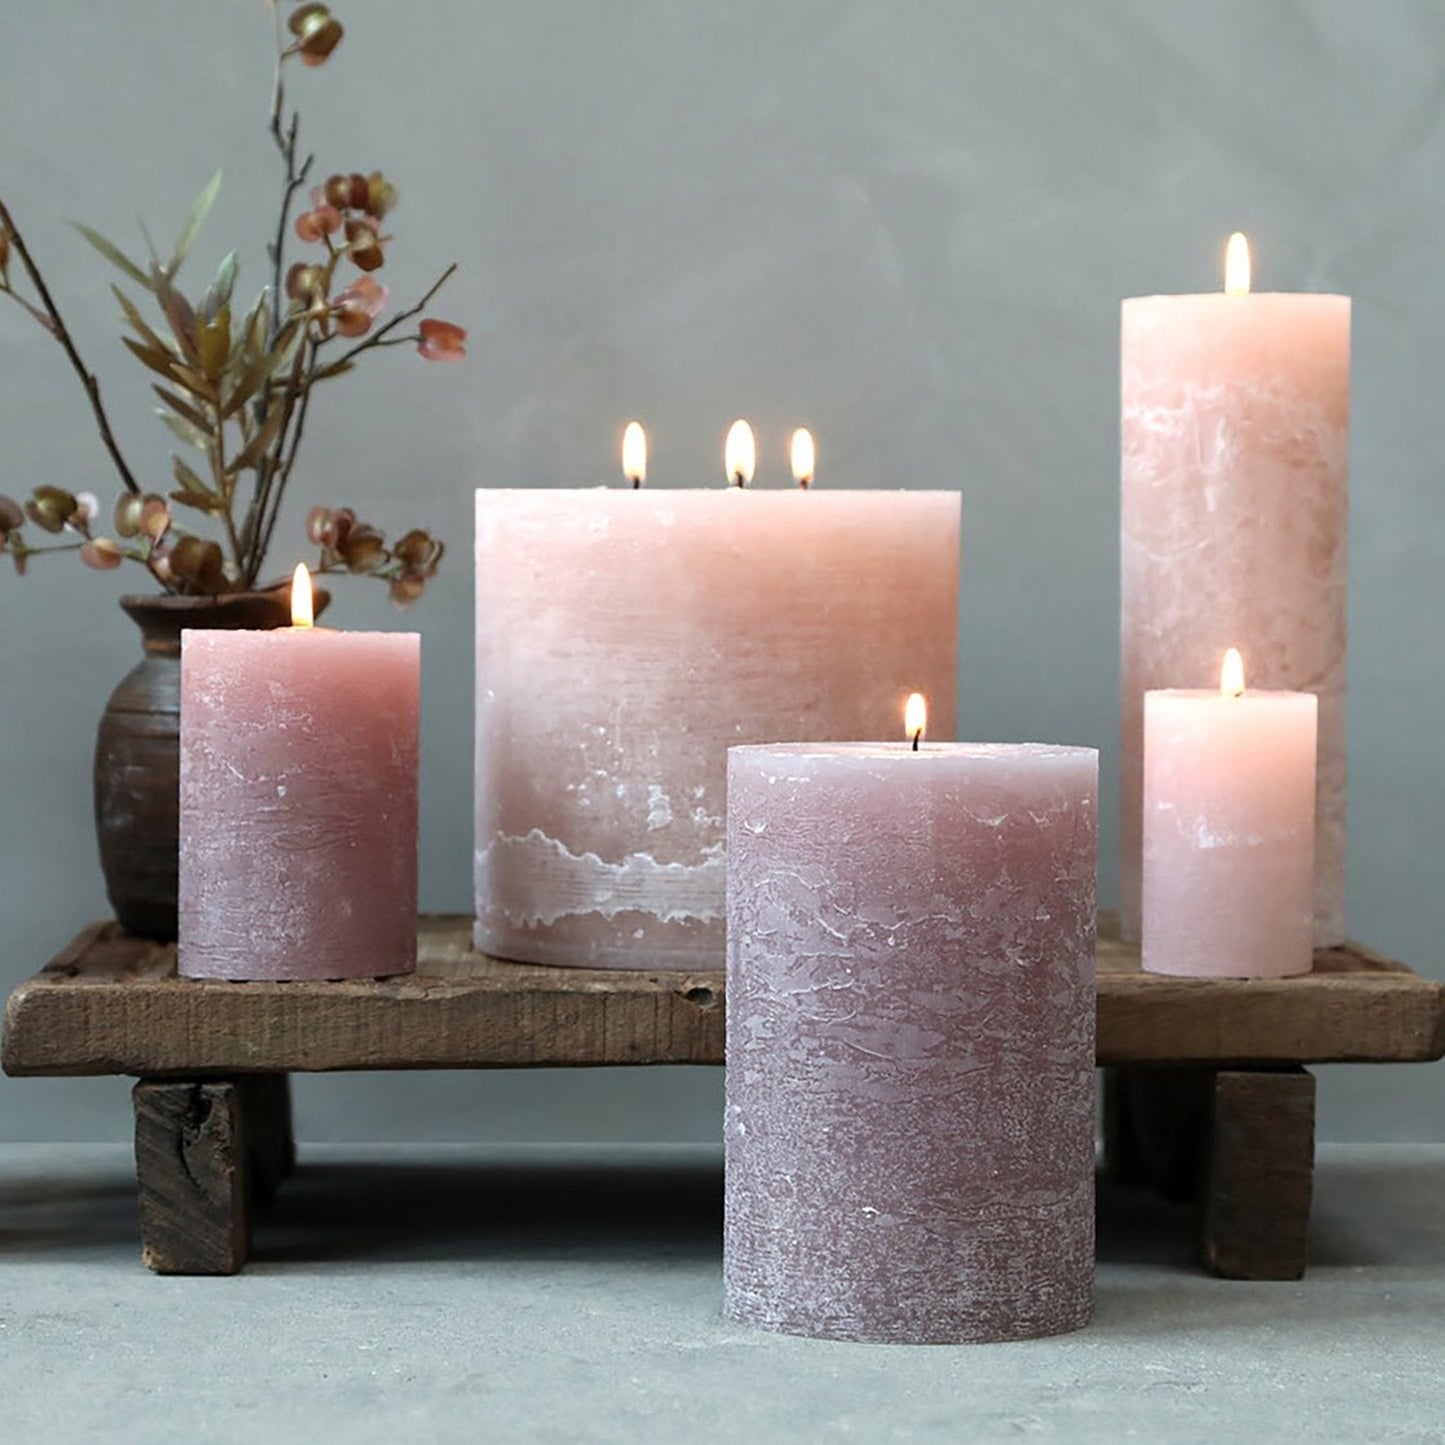 Taupe Rustic 3 Wick Pillar Candle 80 hours - Bumble Living